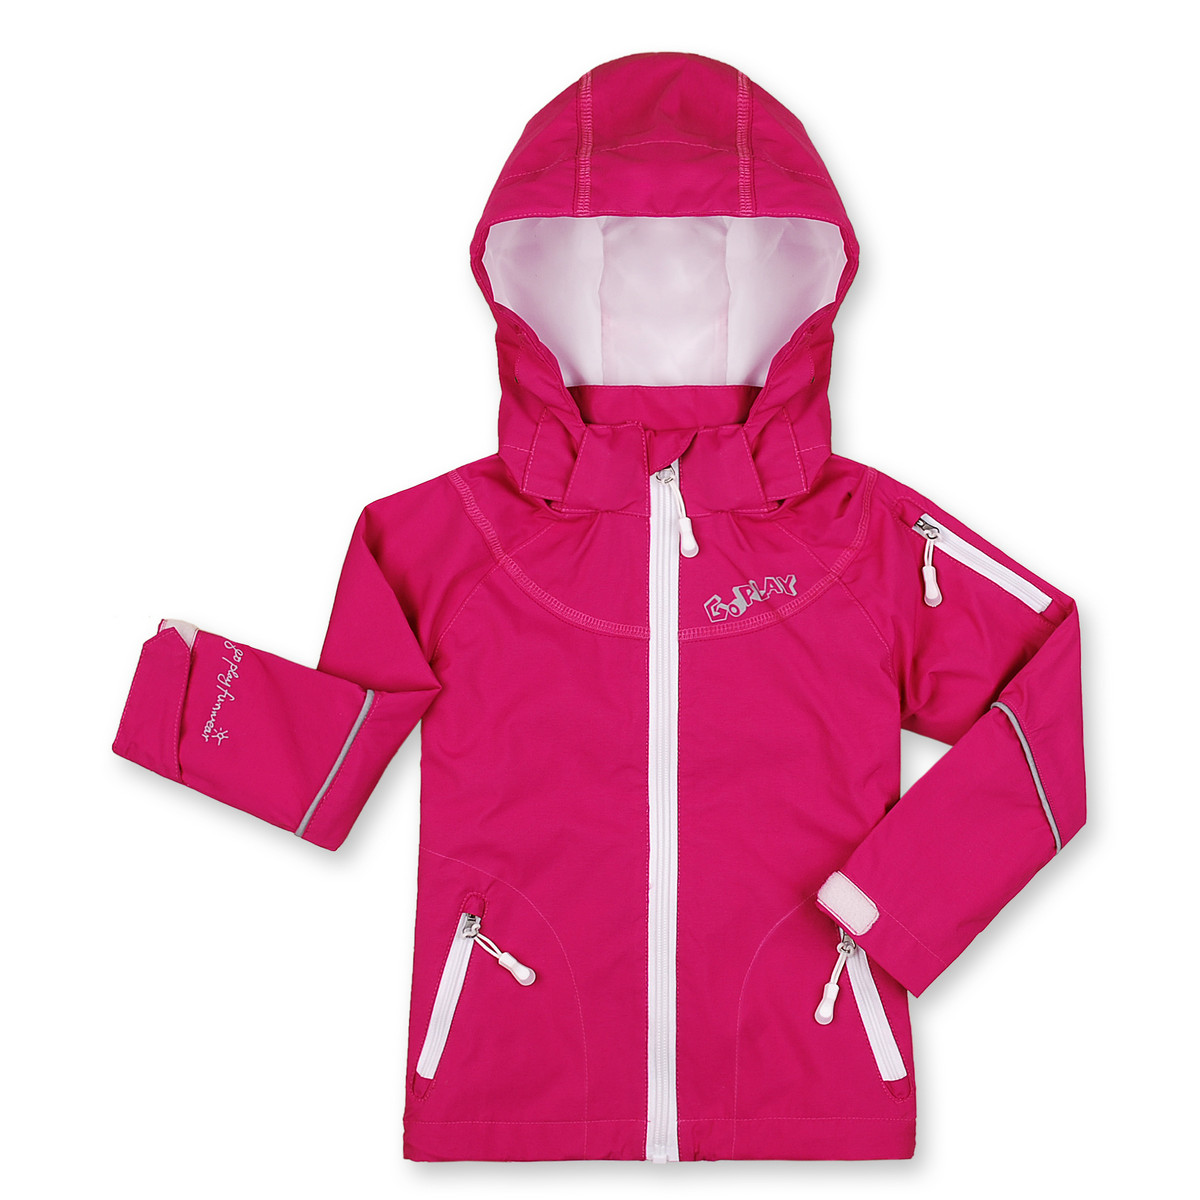 Goplay2013 spring and autumn children's clothing female child windproof waterproof outerwear hooded trench